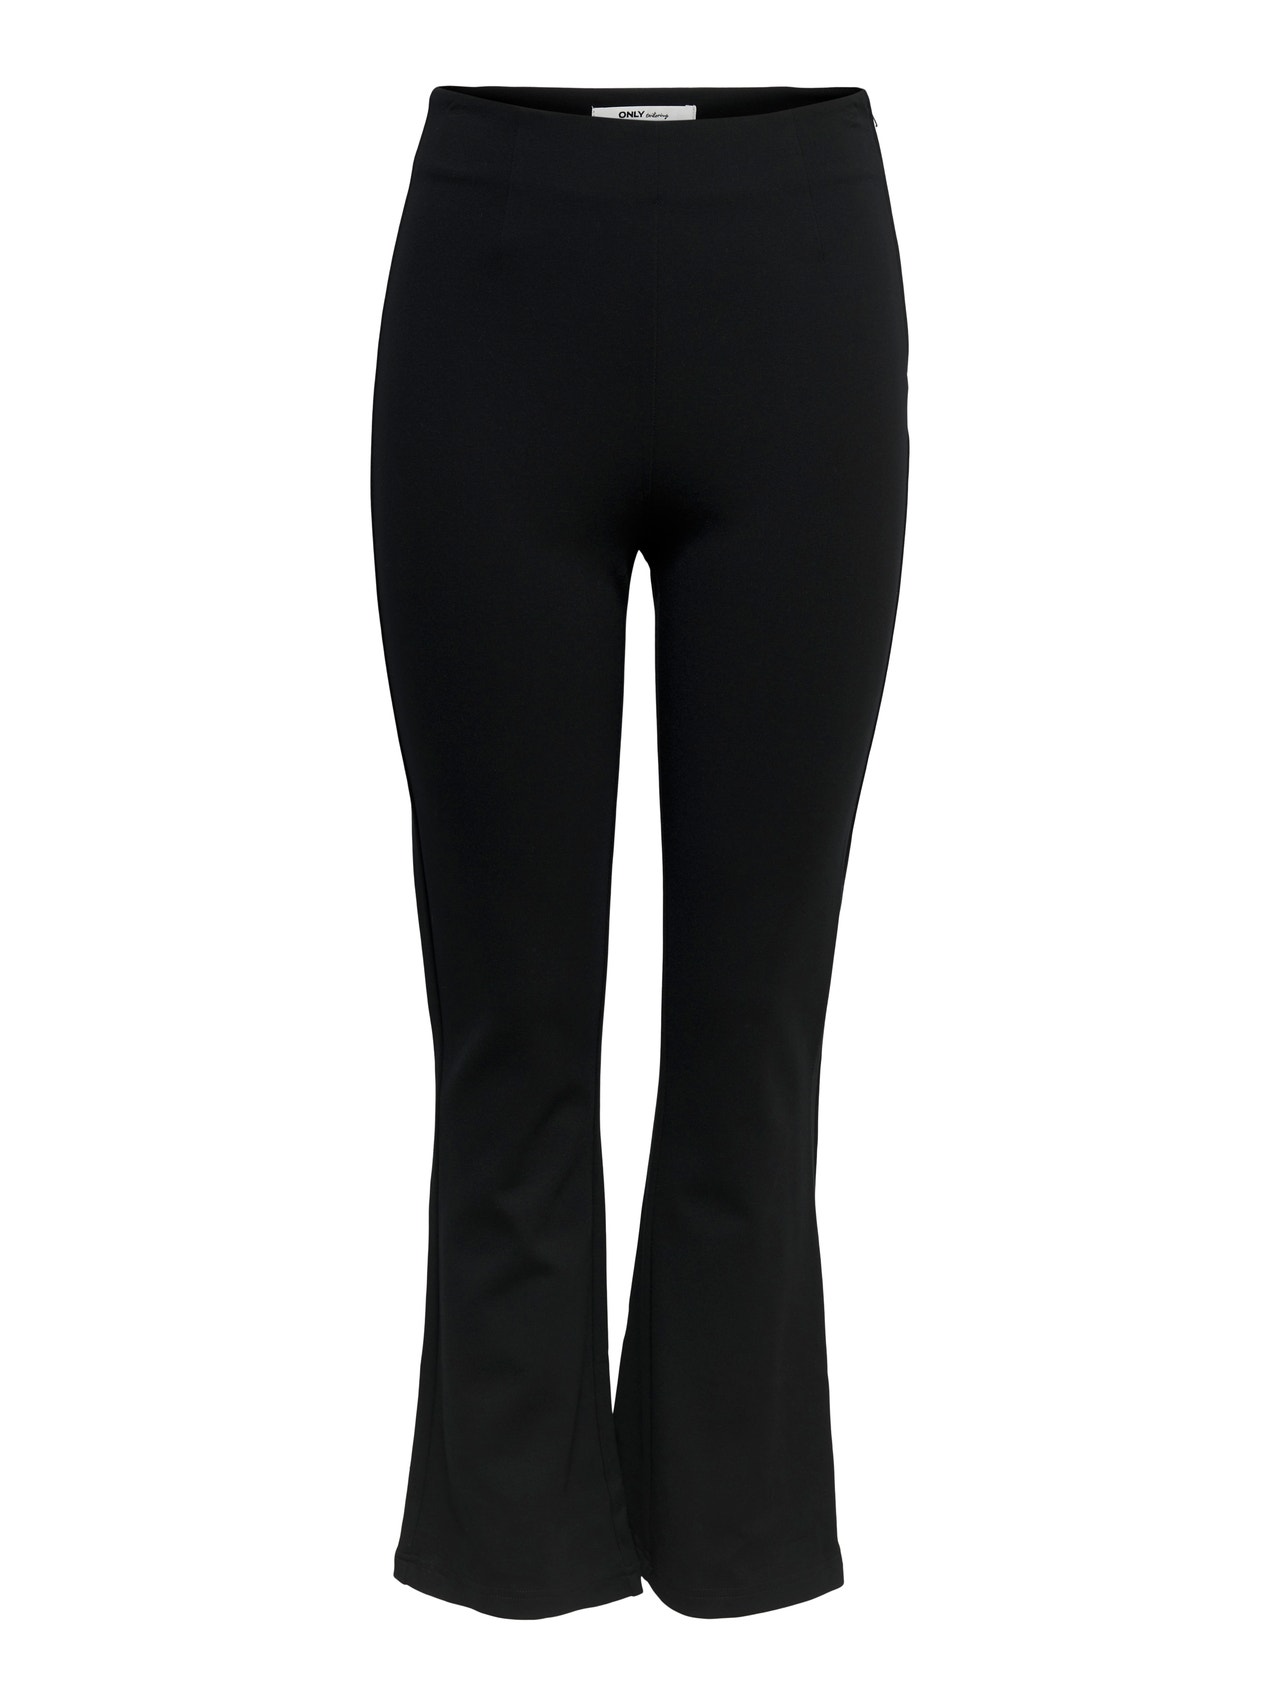 Flared Fit High waist Flared legs Trousers with 20% discount!